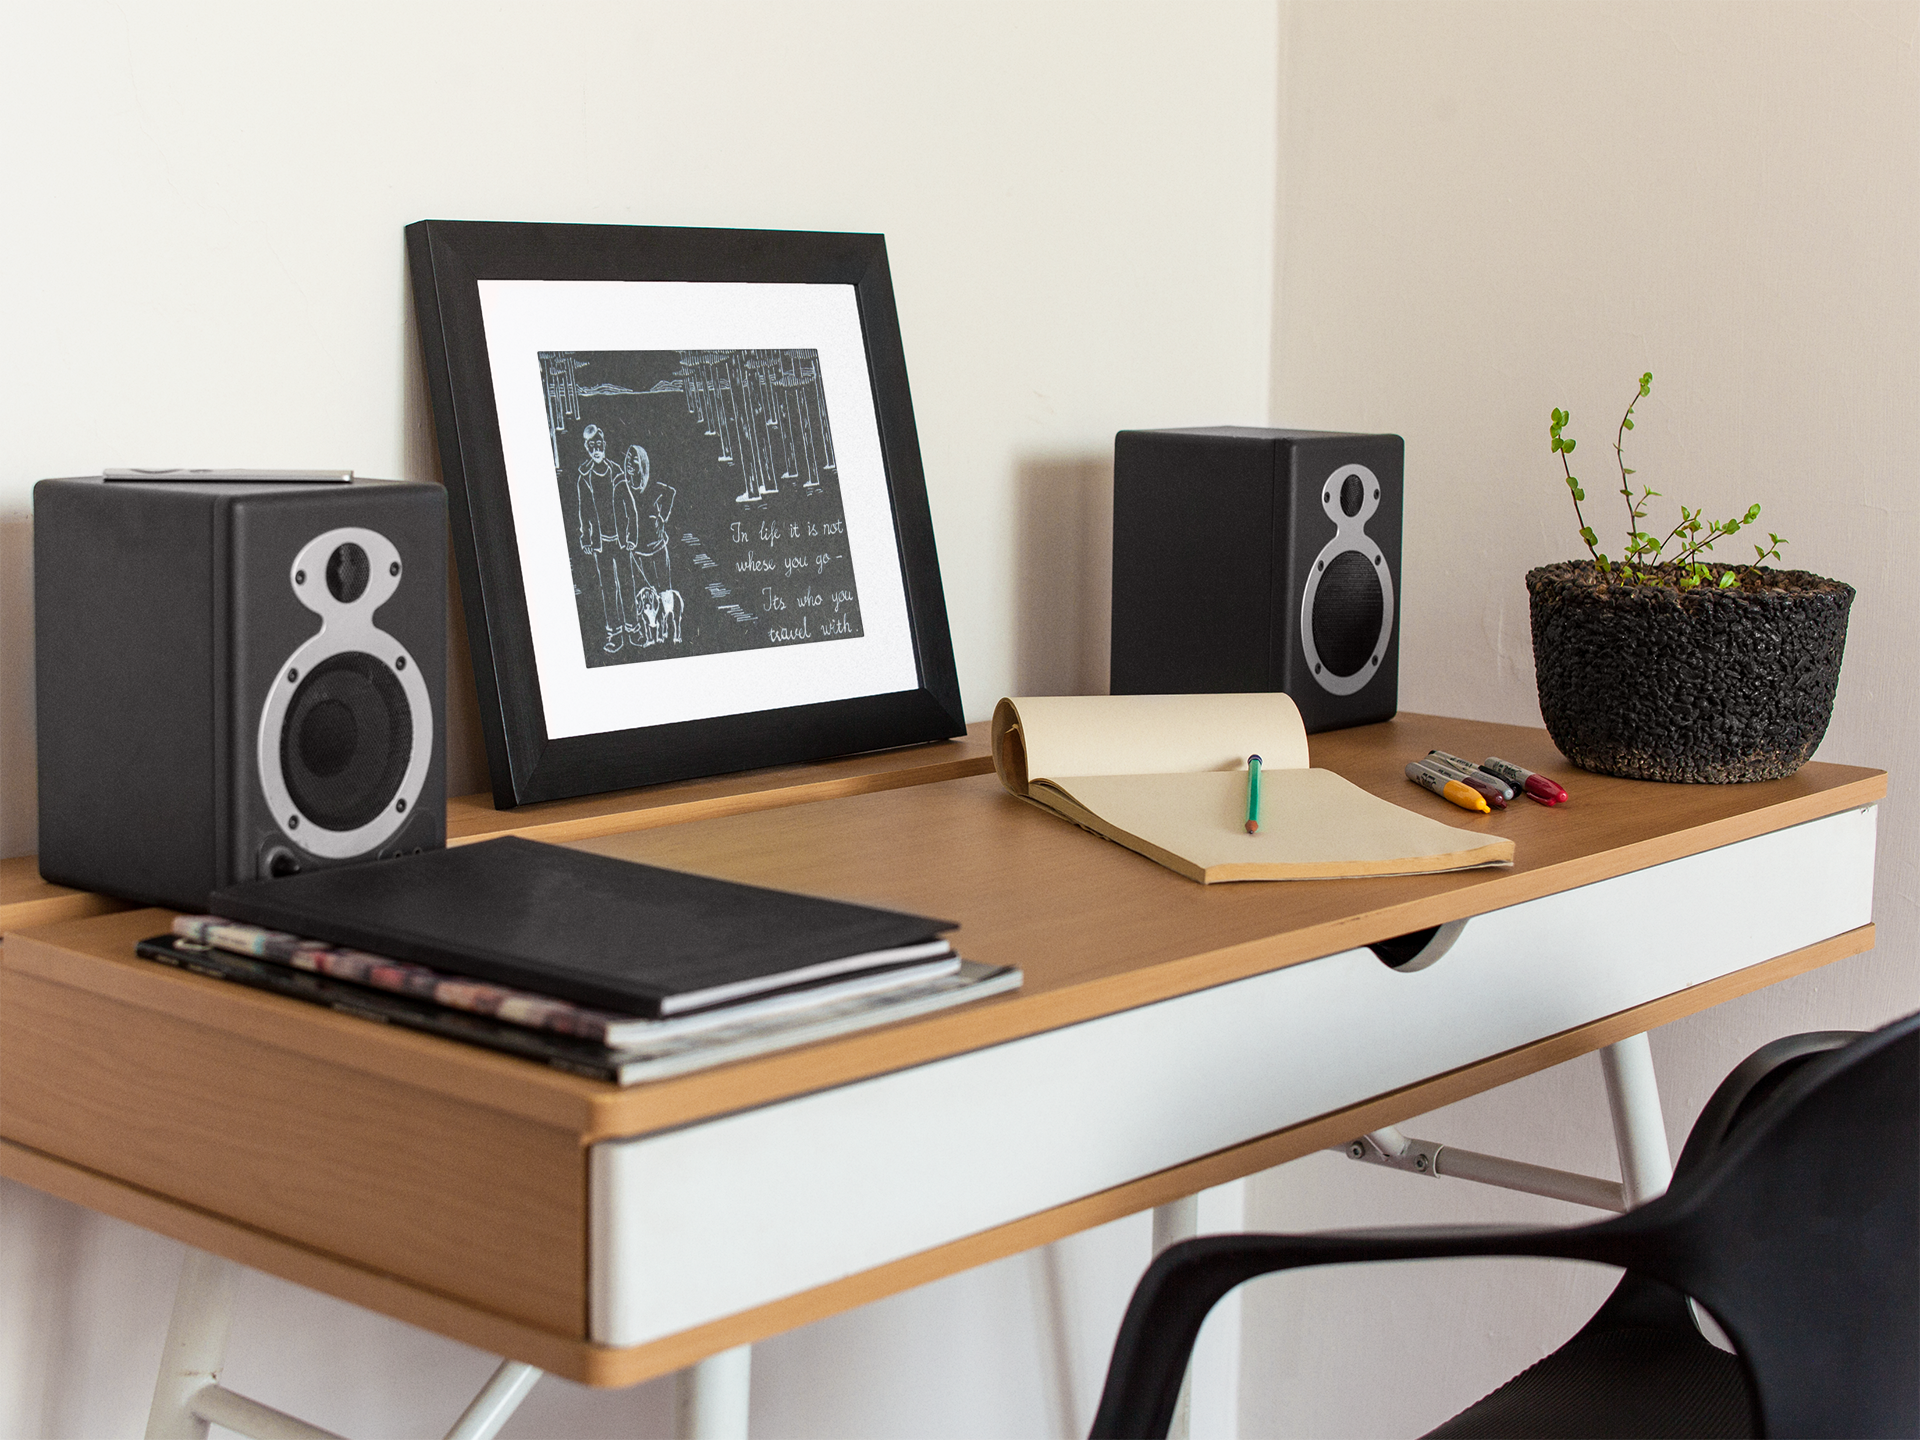 art-print-mockup-on-a-black-frame-lying-on-a-wooden-desk-near-speakers-a14691.png